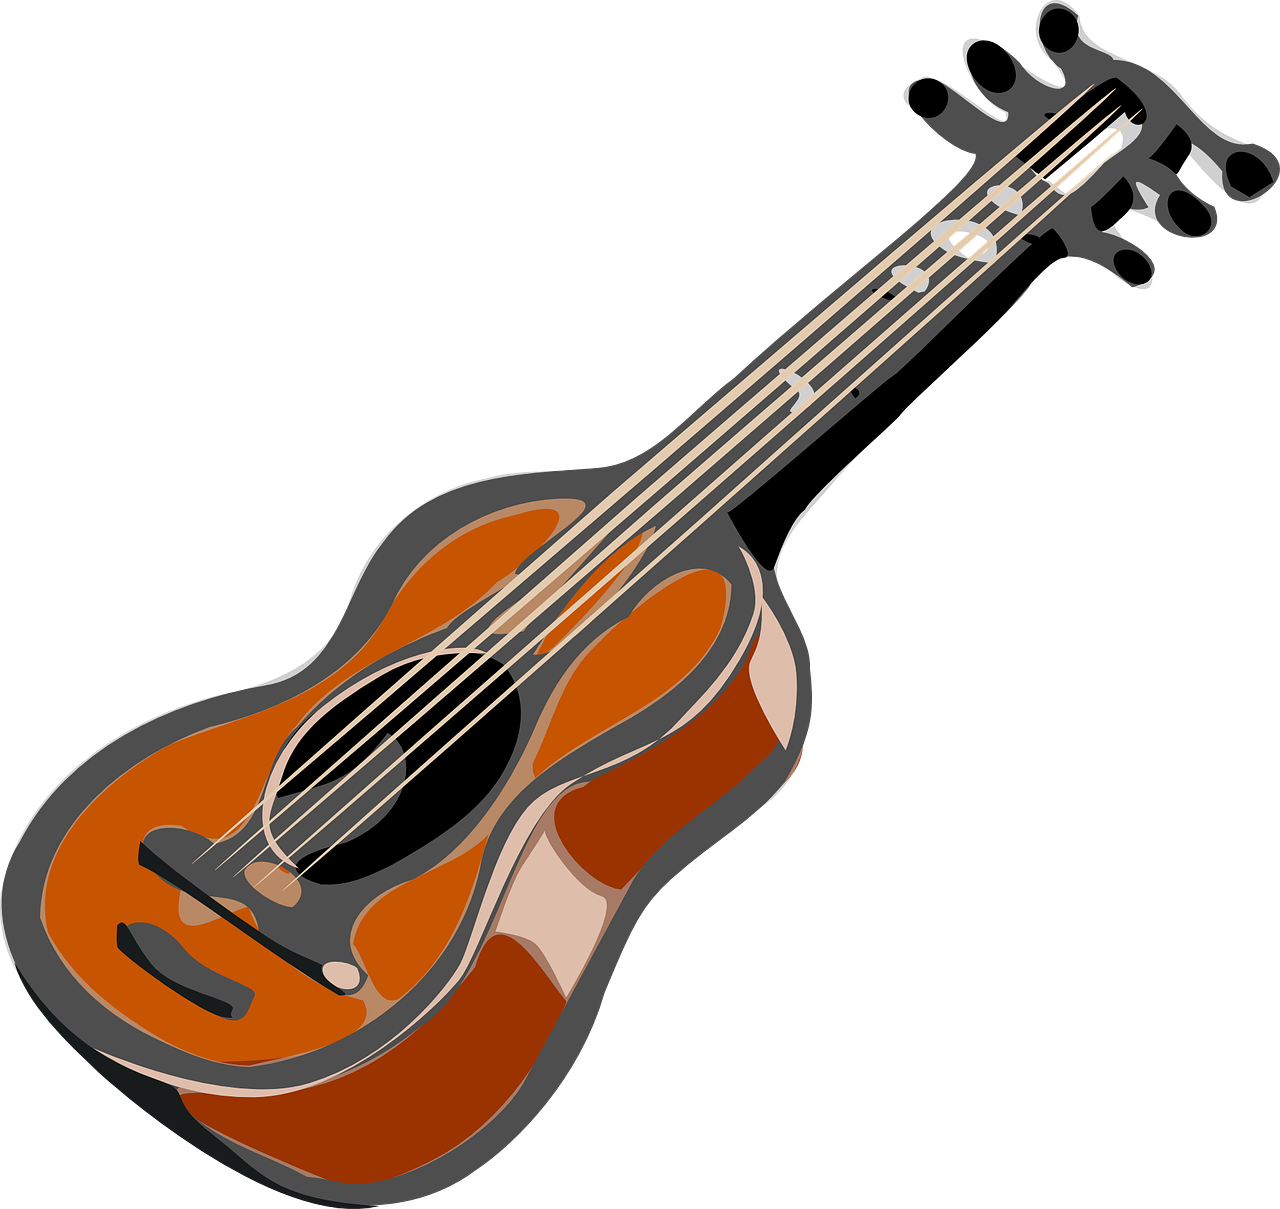 guitar,acoustic guitar,stringed instrument,musical instrument,strumming,plucking,picking,free vector graphics,free pictures, free photos, free images, royalty free, free illustrations, public domain